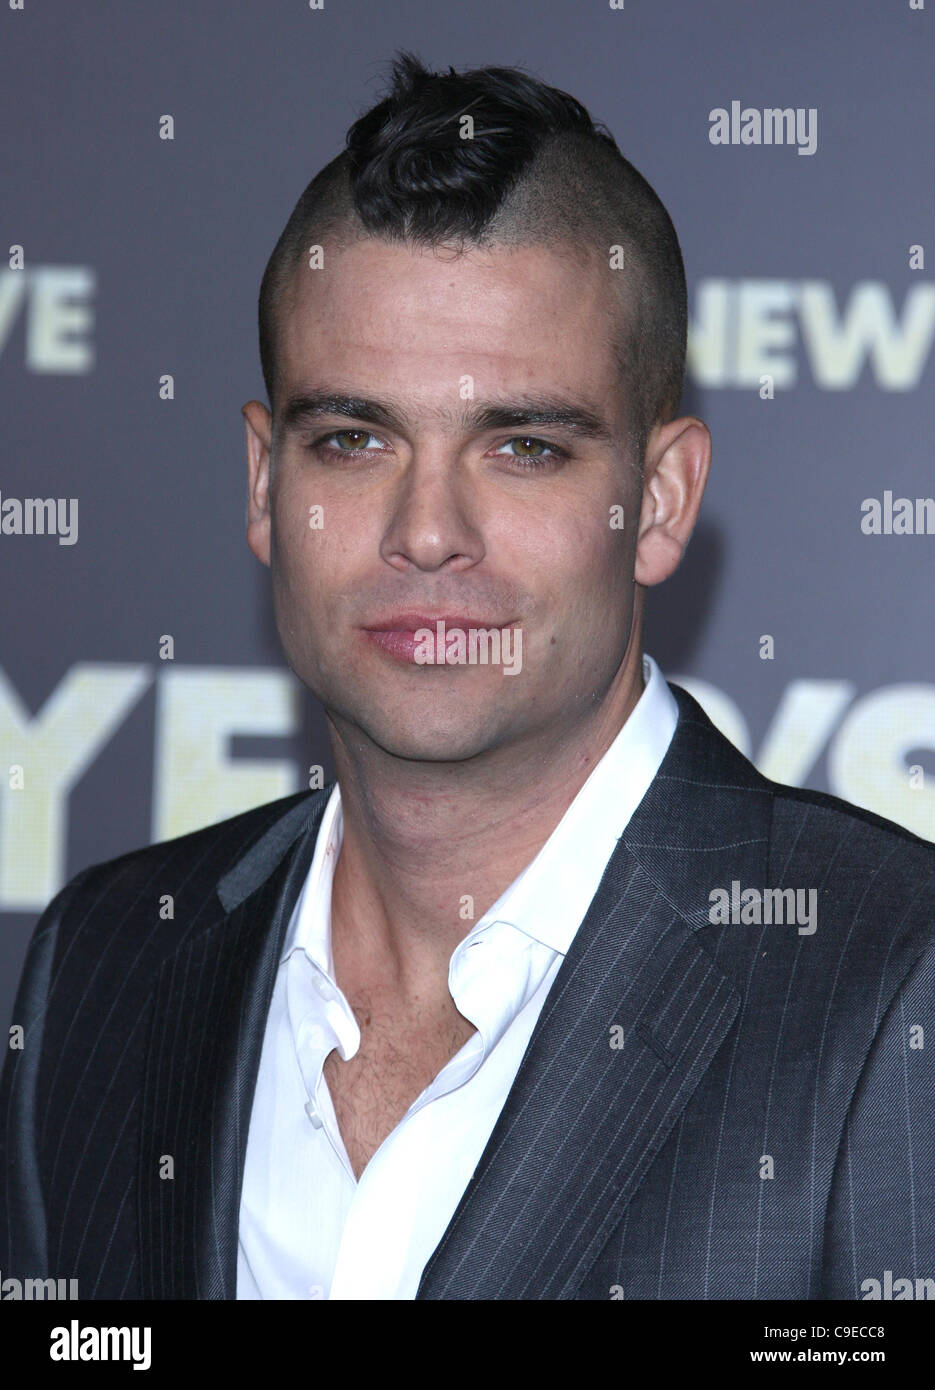 MARK SALLING NEW YEAR'S EVE. WORLD PREMIERE HOLLYWOOD LOS ANGELES CALIFORNIA USA 05 December 2011 Stock Photo